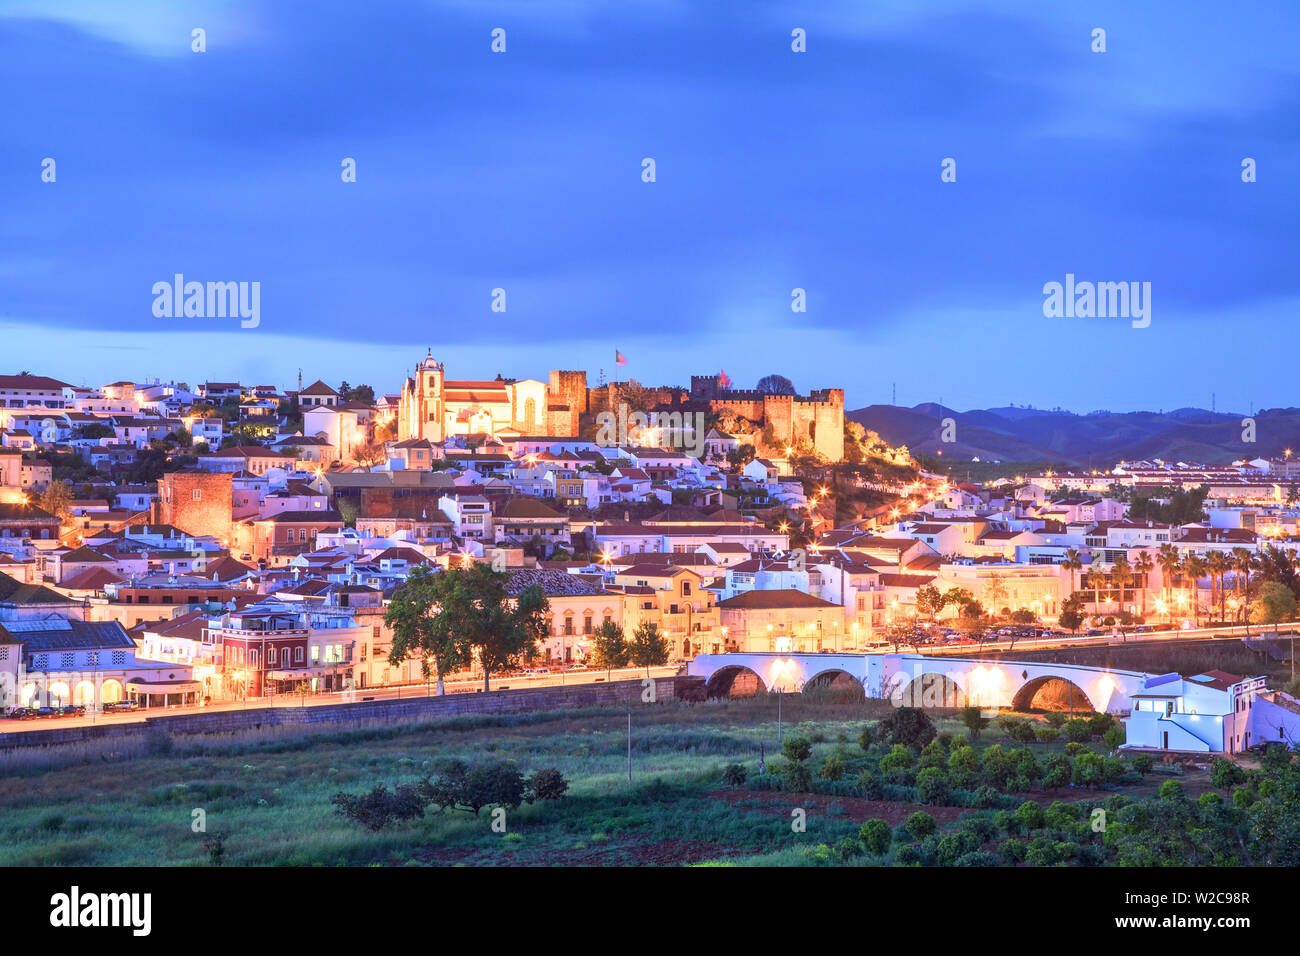 Old Cathedral and Castle at Dusk, Silves, Western Algarve, Algarve, Portugal, Europe Stock Photo